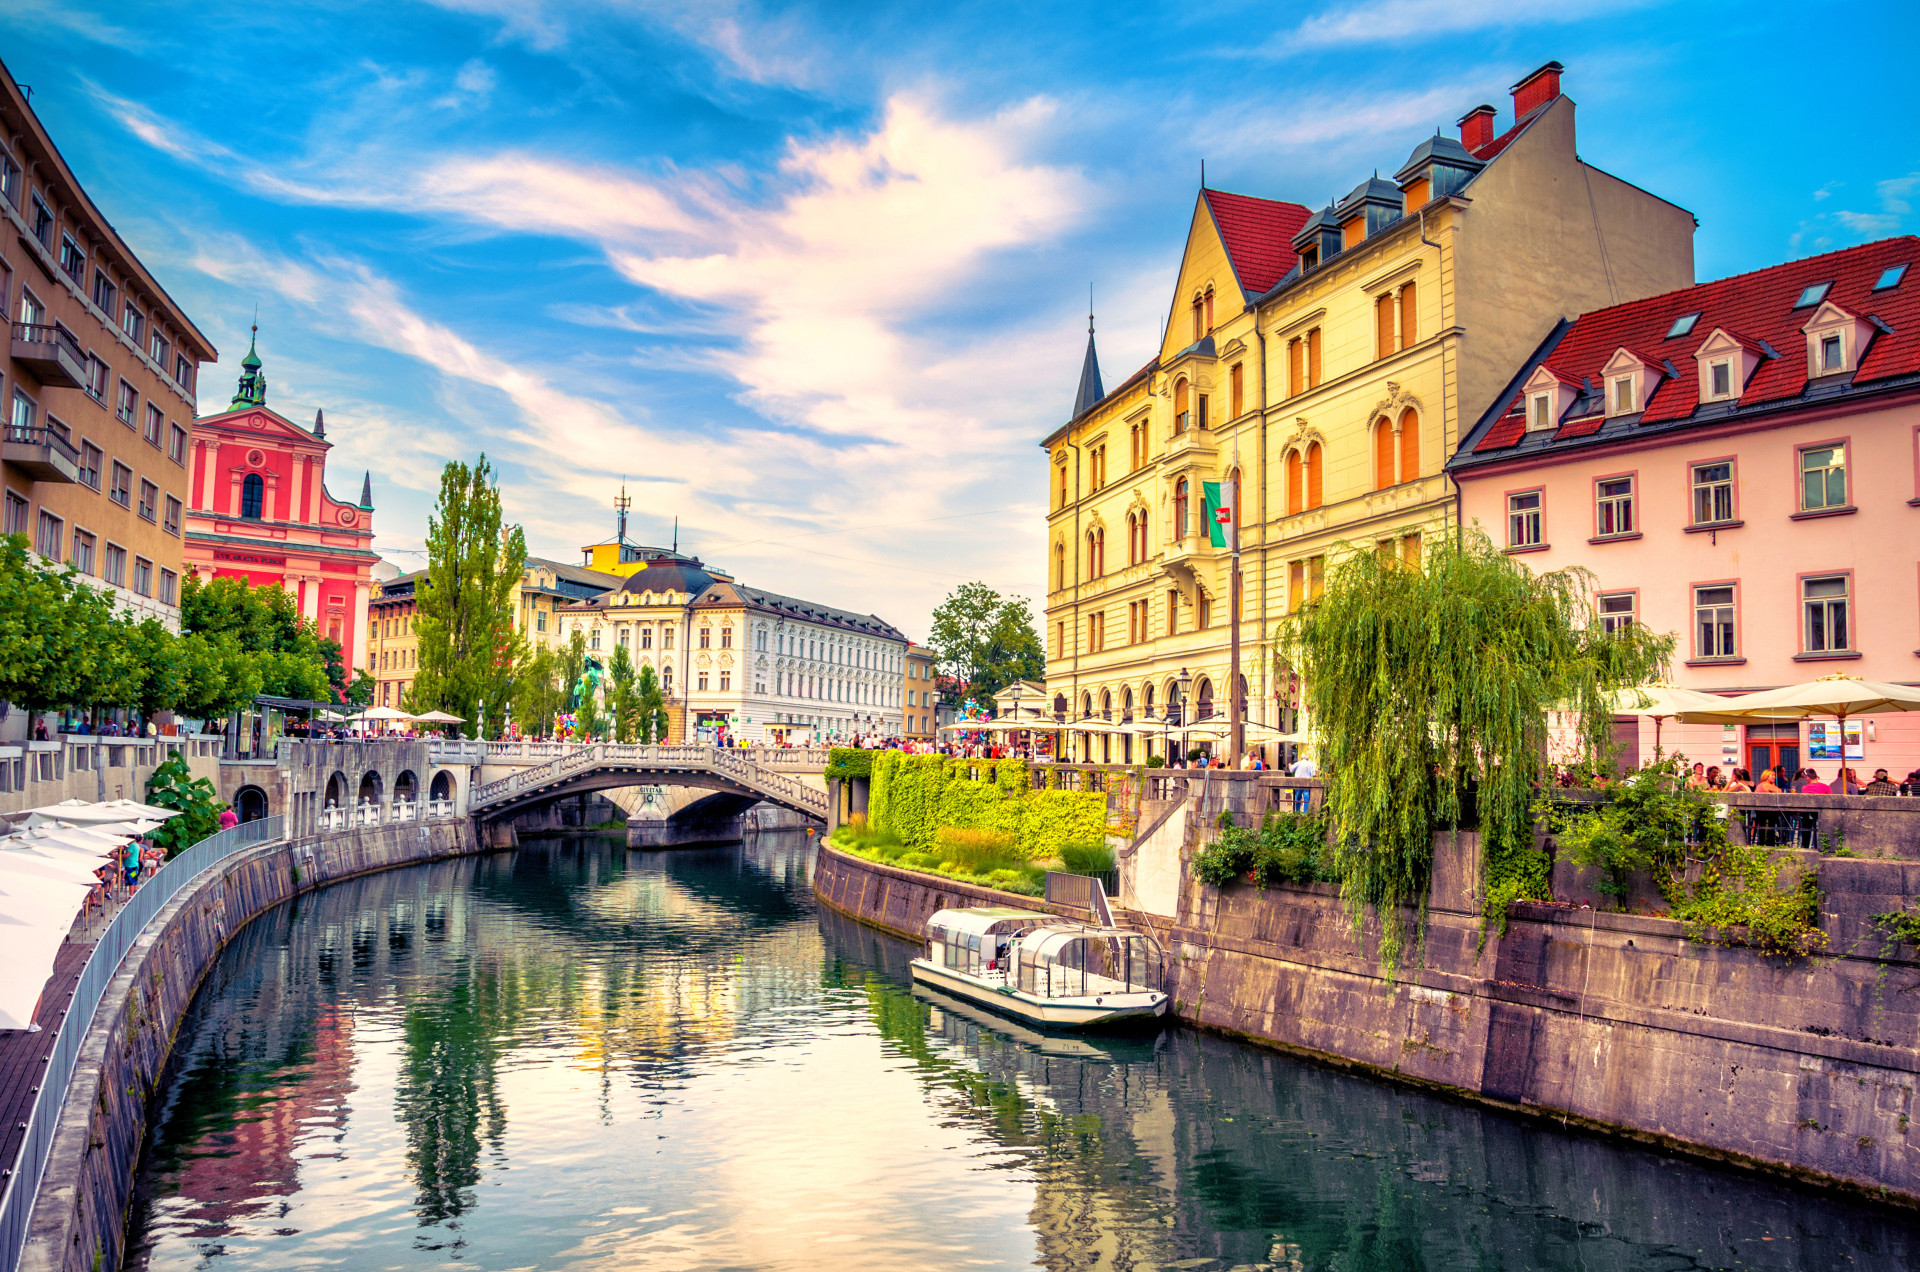 Ljubljana's transport system is pretty good in terms of accessibility, and the Slovenian capital is also considered one of the most sustainable cities in the world.<p><a href="https://www.msn.com/en-us/community/channel/vid-7xx8mnucu55yw63we9va2gwr7uihbxwc68fxqp25x6tg4ftibpra?cvid=94631541bc0f4f89bfd59158d696ad7e">Follow us and access great exclusive content every day</a></p>